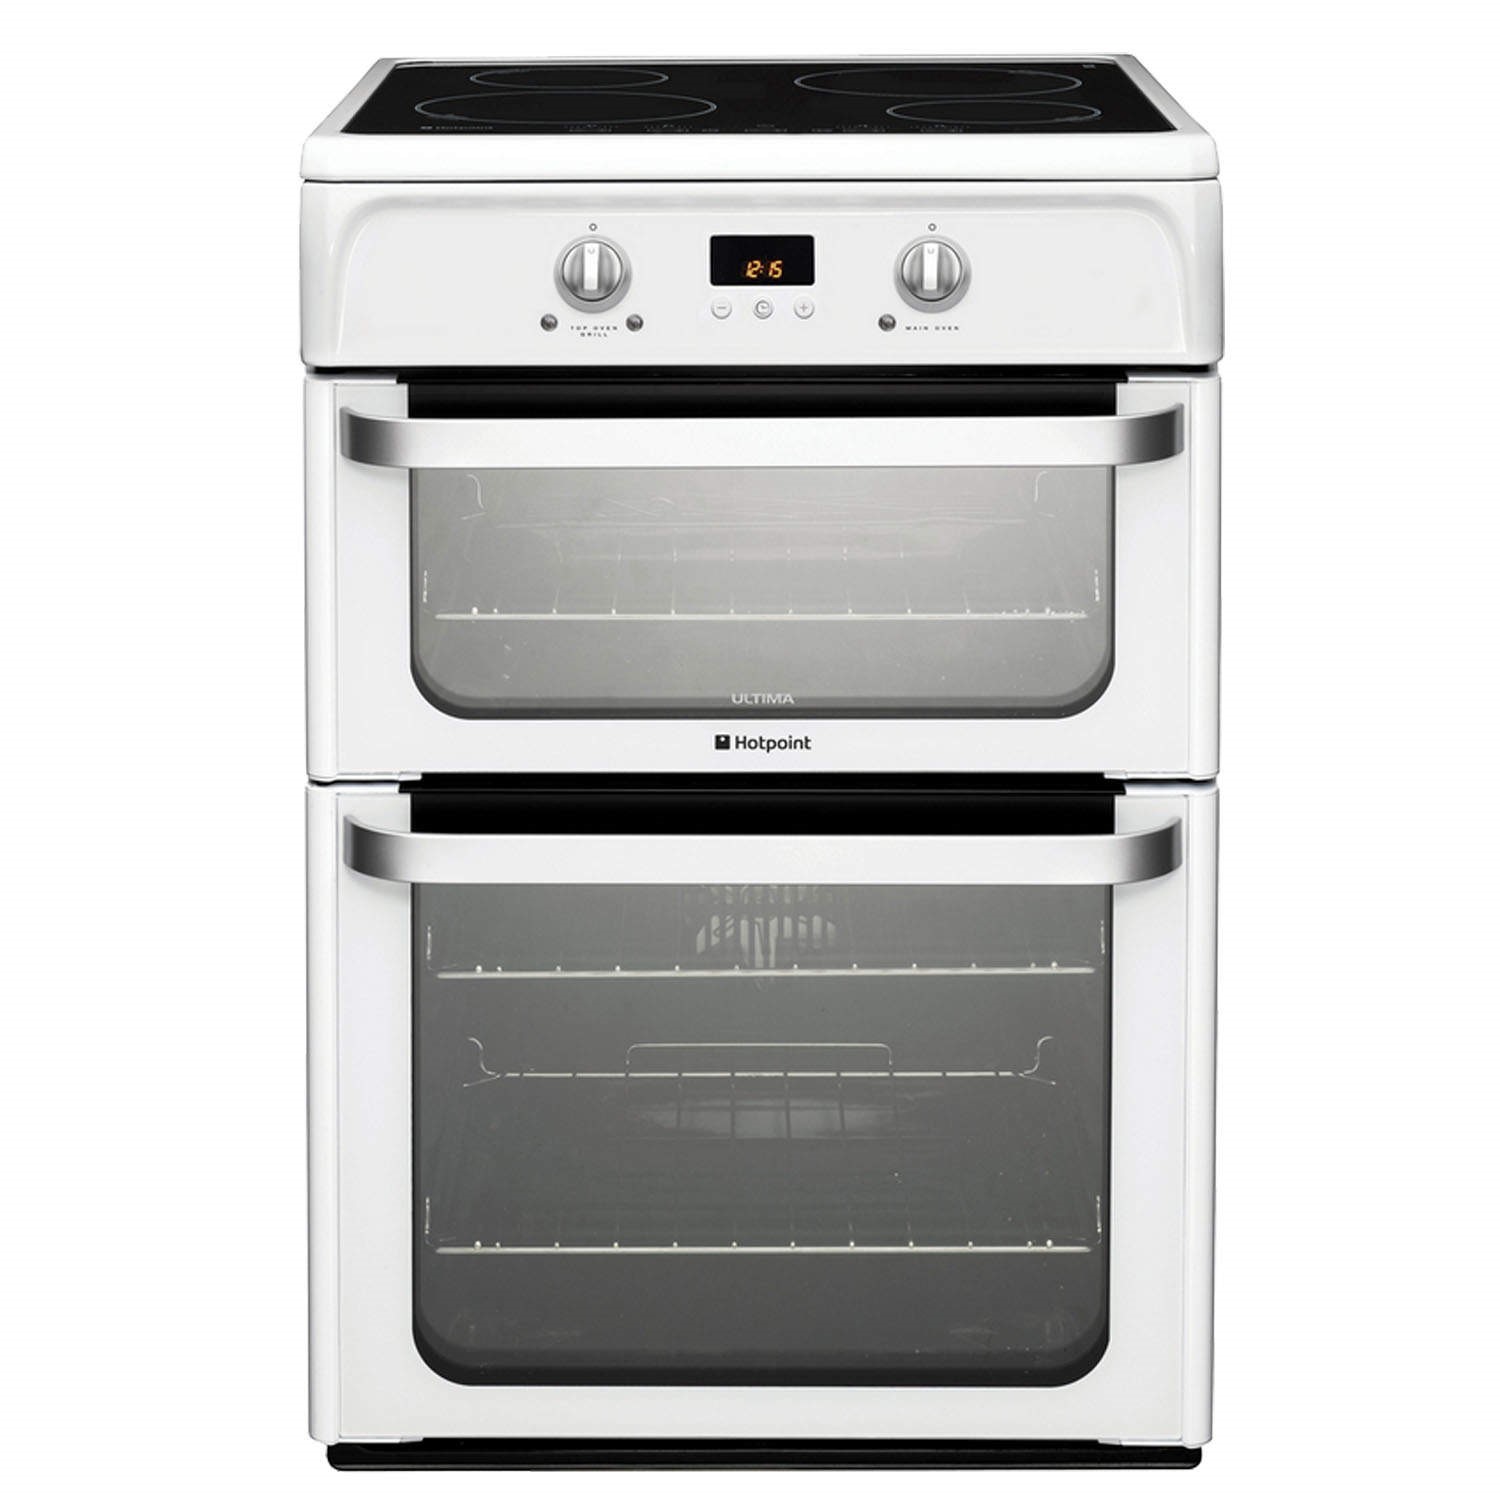 Hotpoint Ultima 60cm Double Oven Electric Cooker with Induction Hob - White